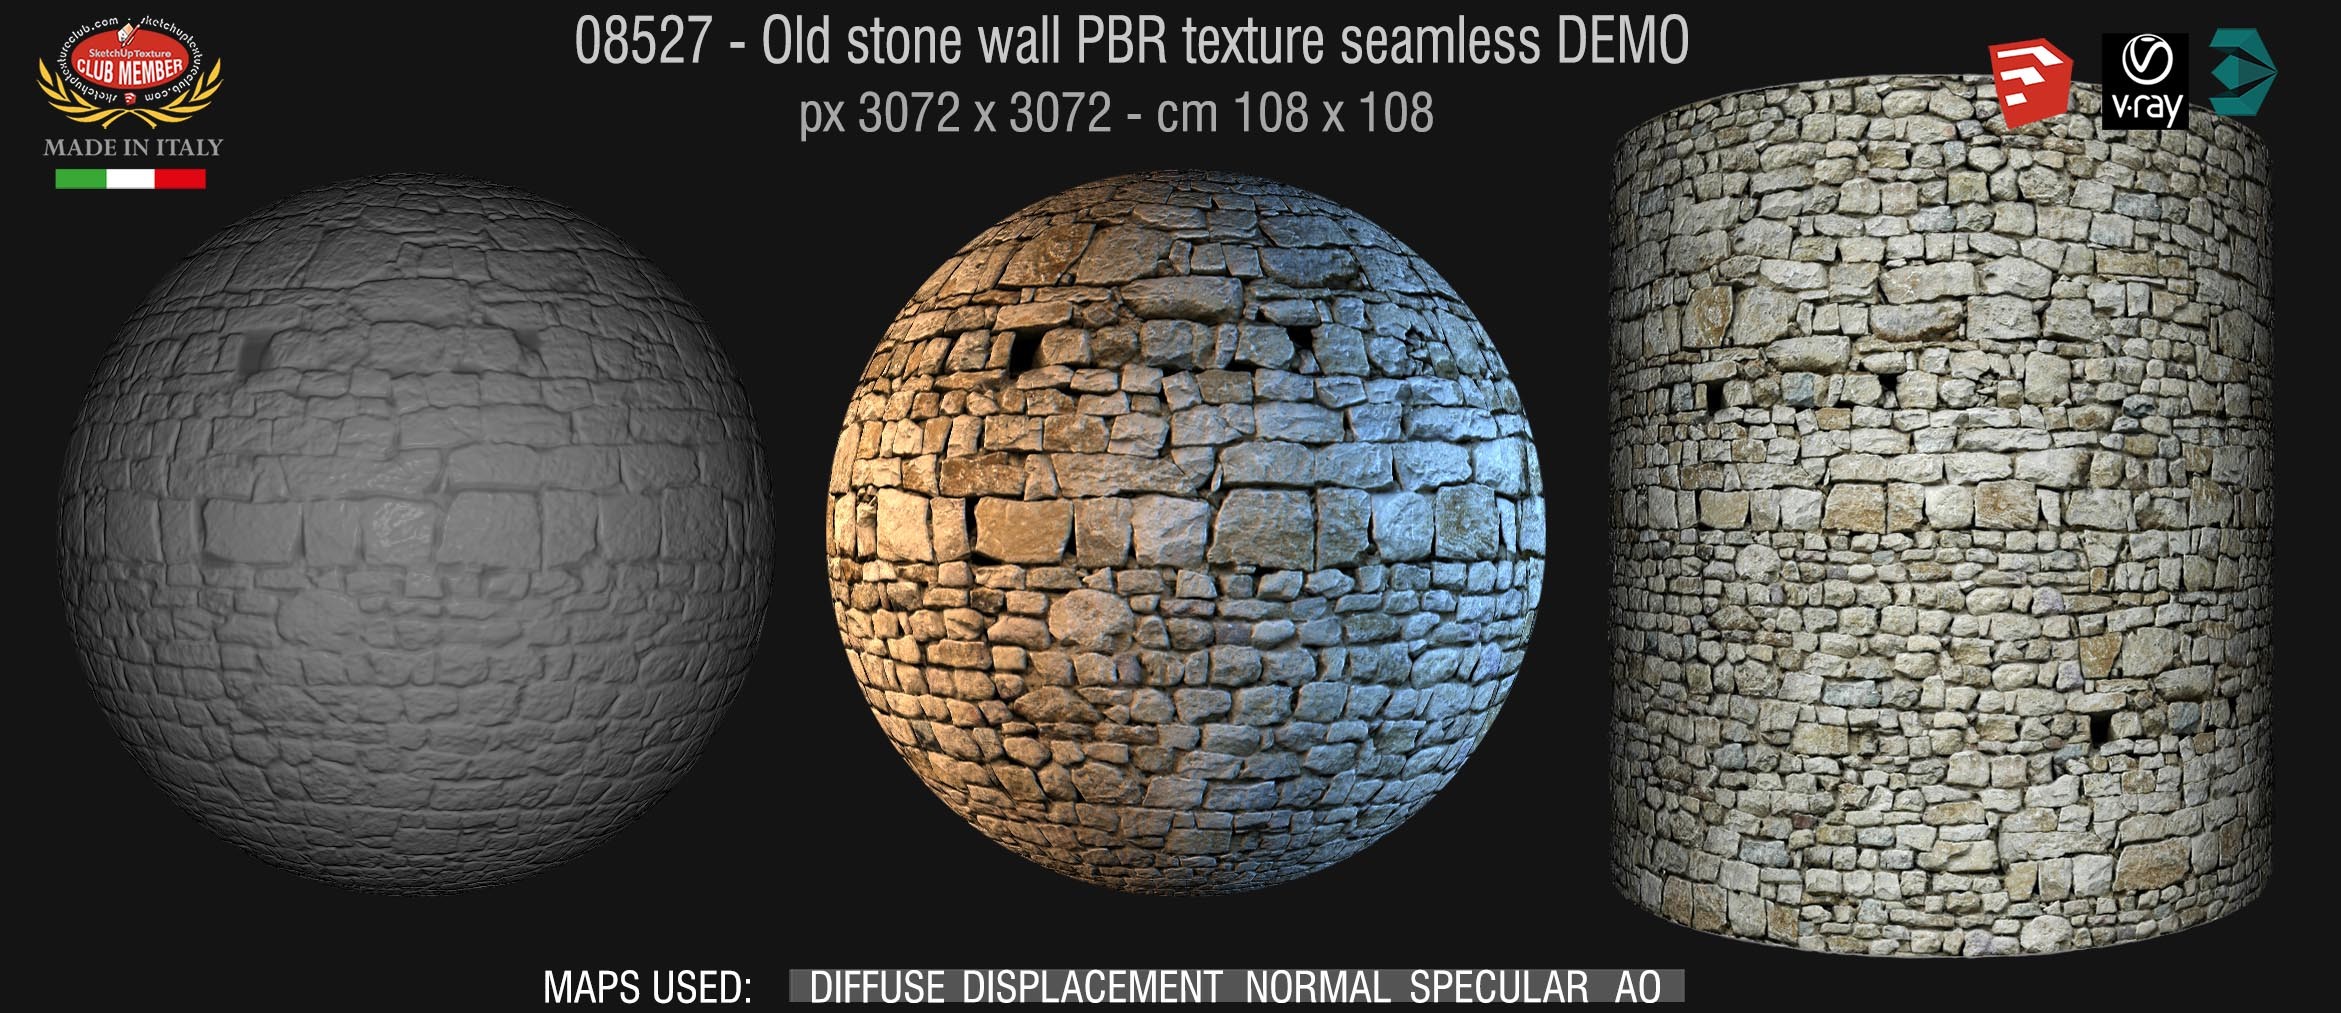 08527 Old stone wall PBR texture seamless DEMO